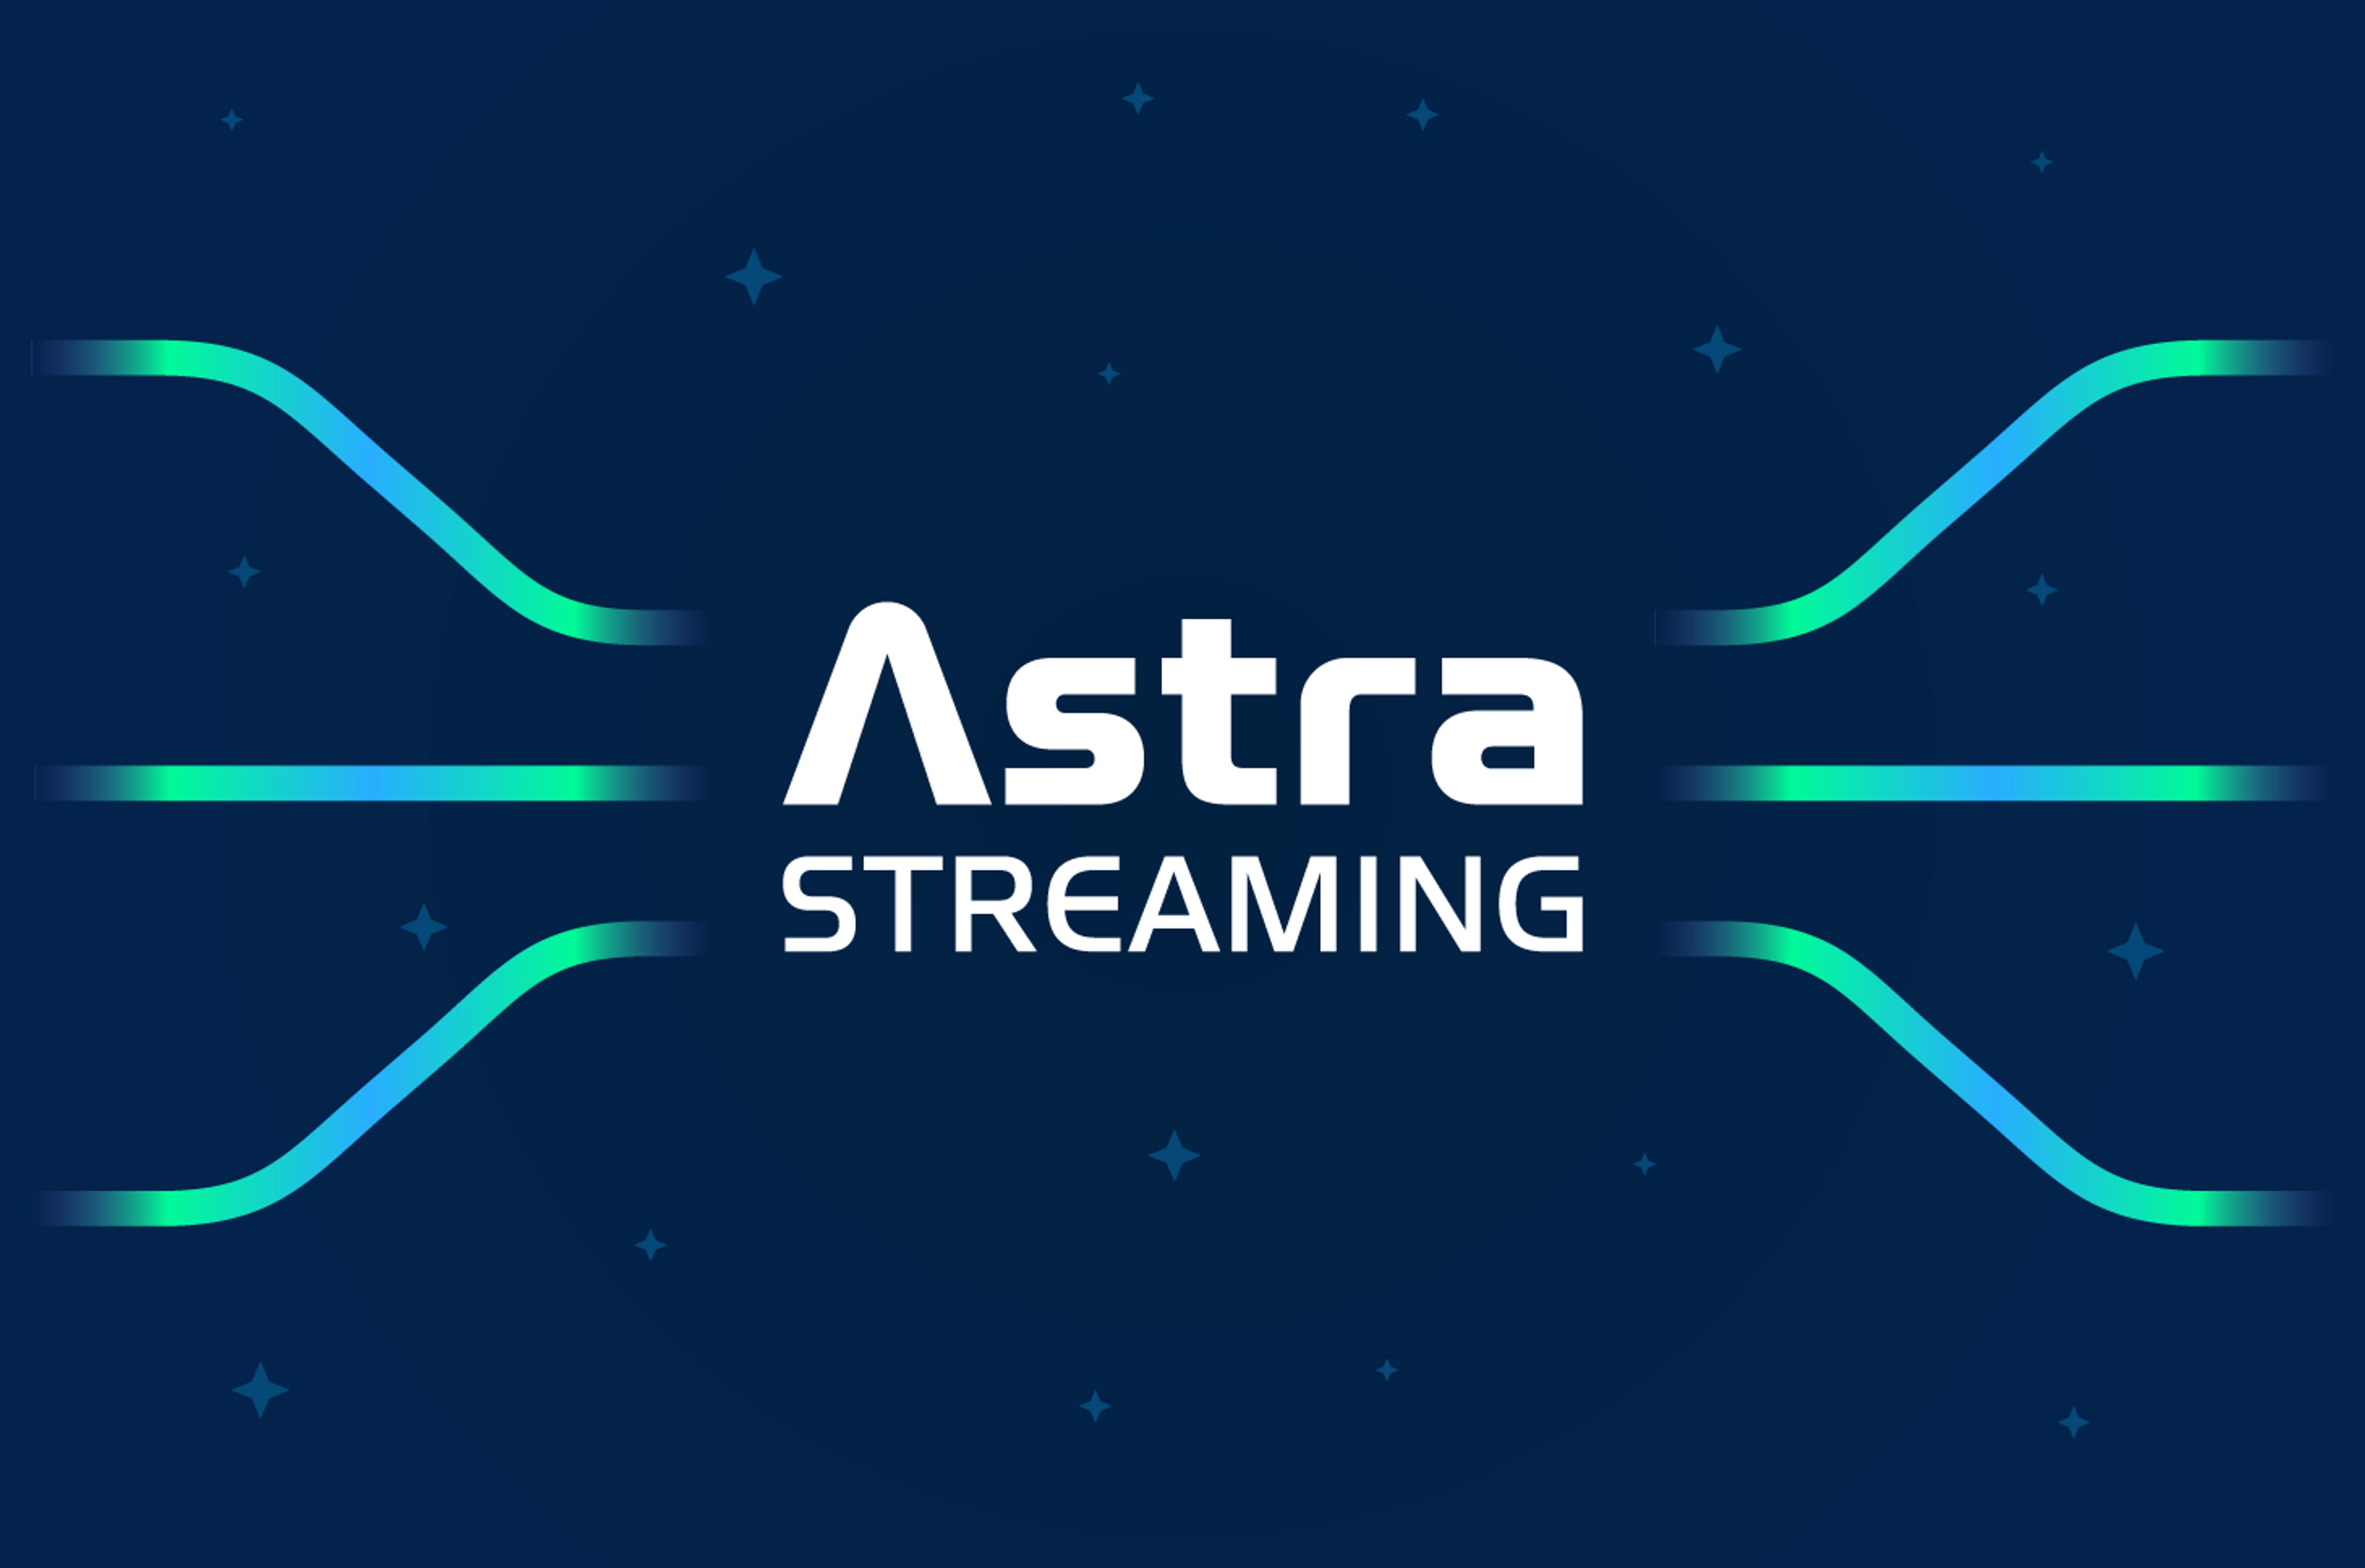 Astra Streaming – The Data Infrastructure for Building Real-time Capabilities